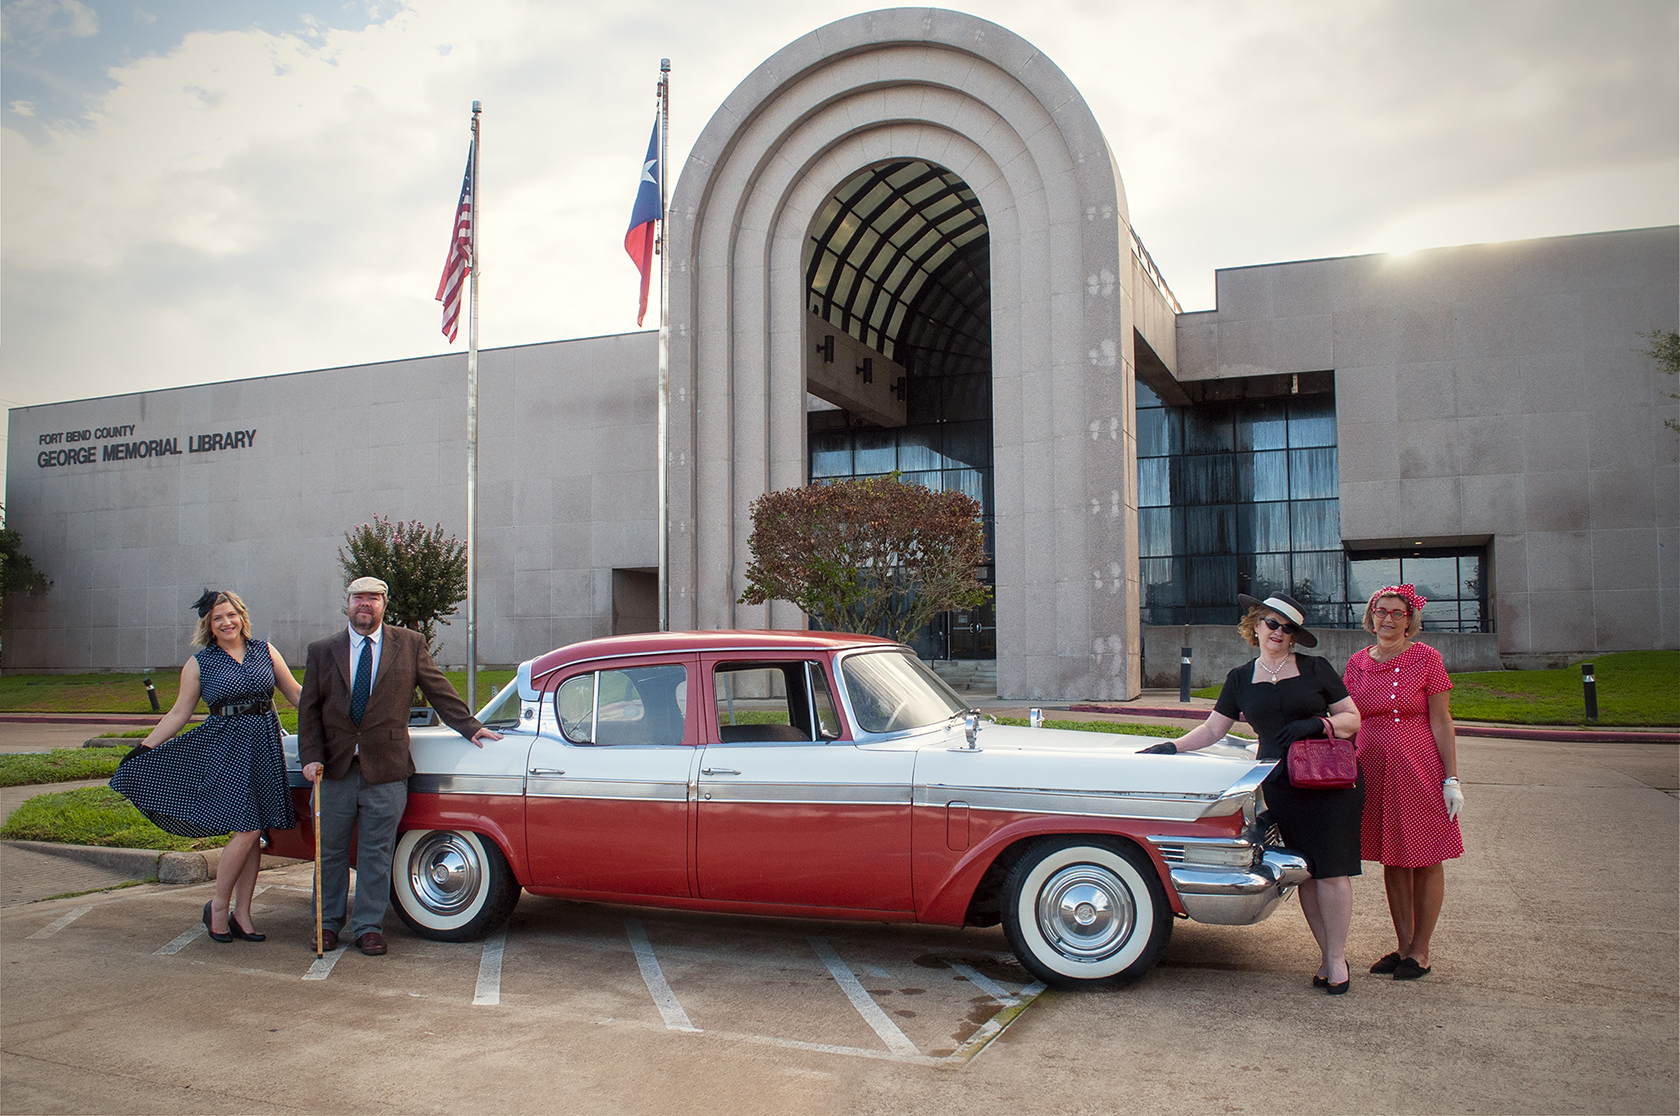 Vintage car in front of George Memorial Library with Library staff dressed in 1940s attire standing around the car. 